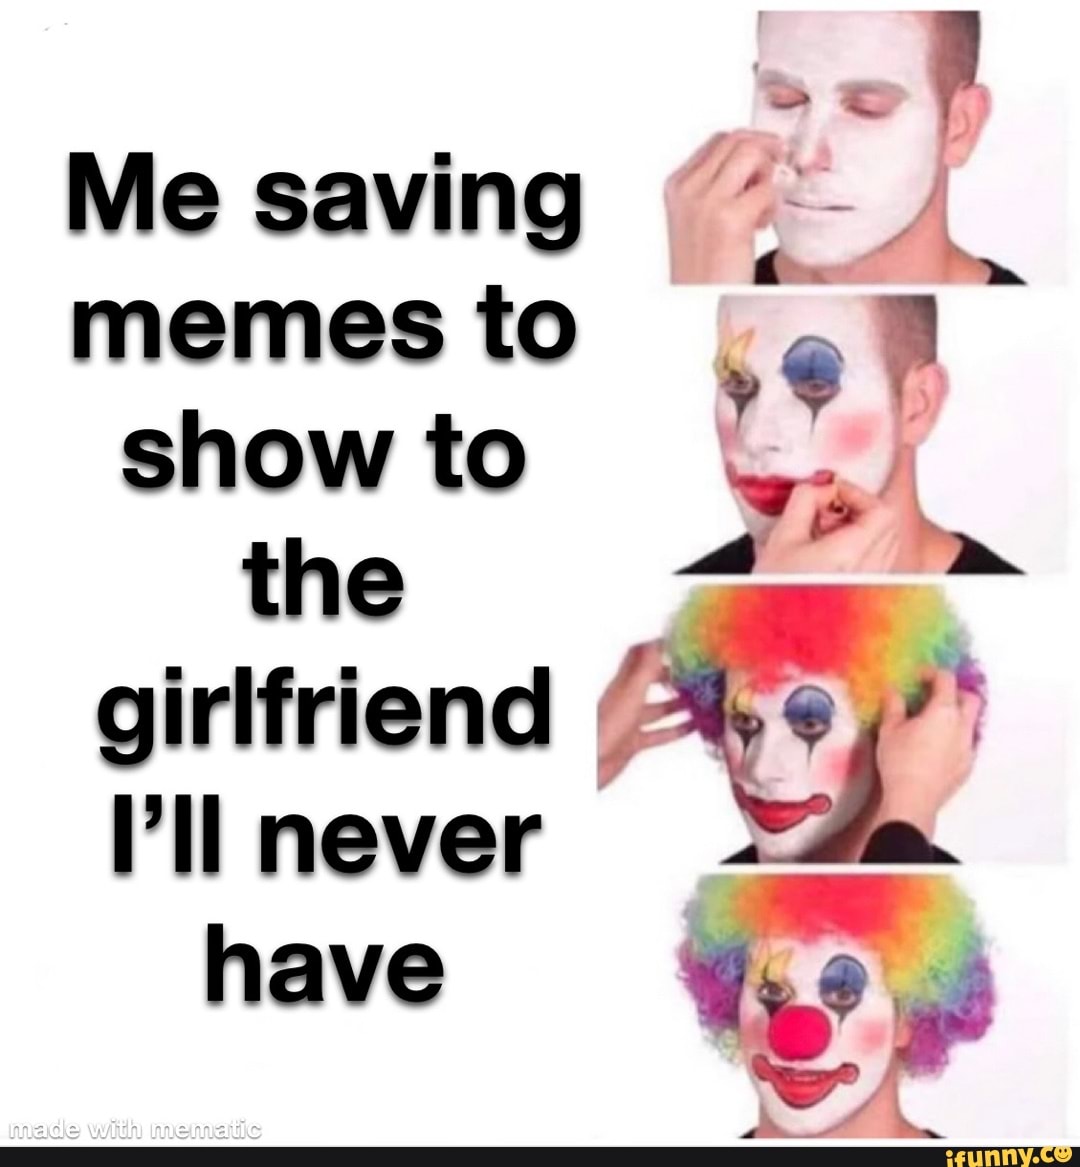 Me saving memes to show to the girlfriend ll never have - iFunny